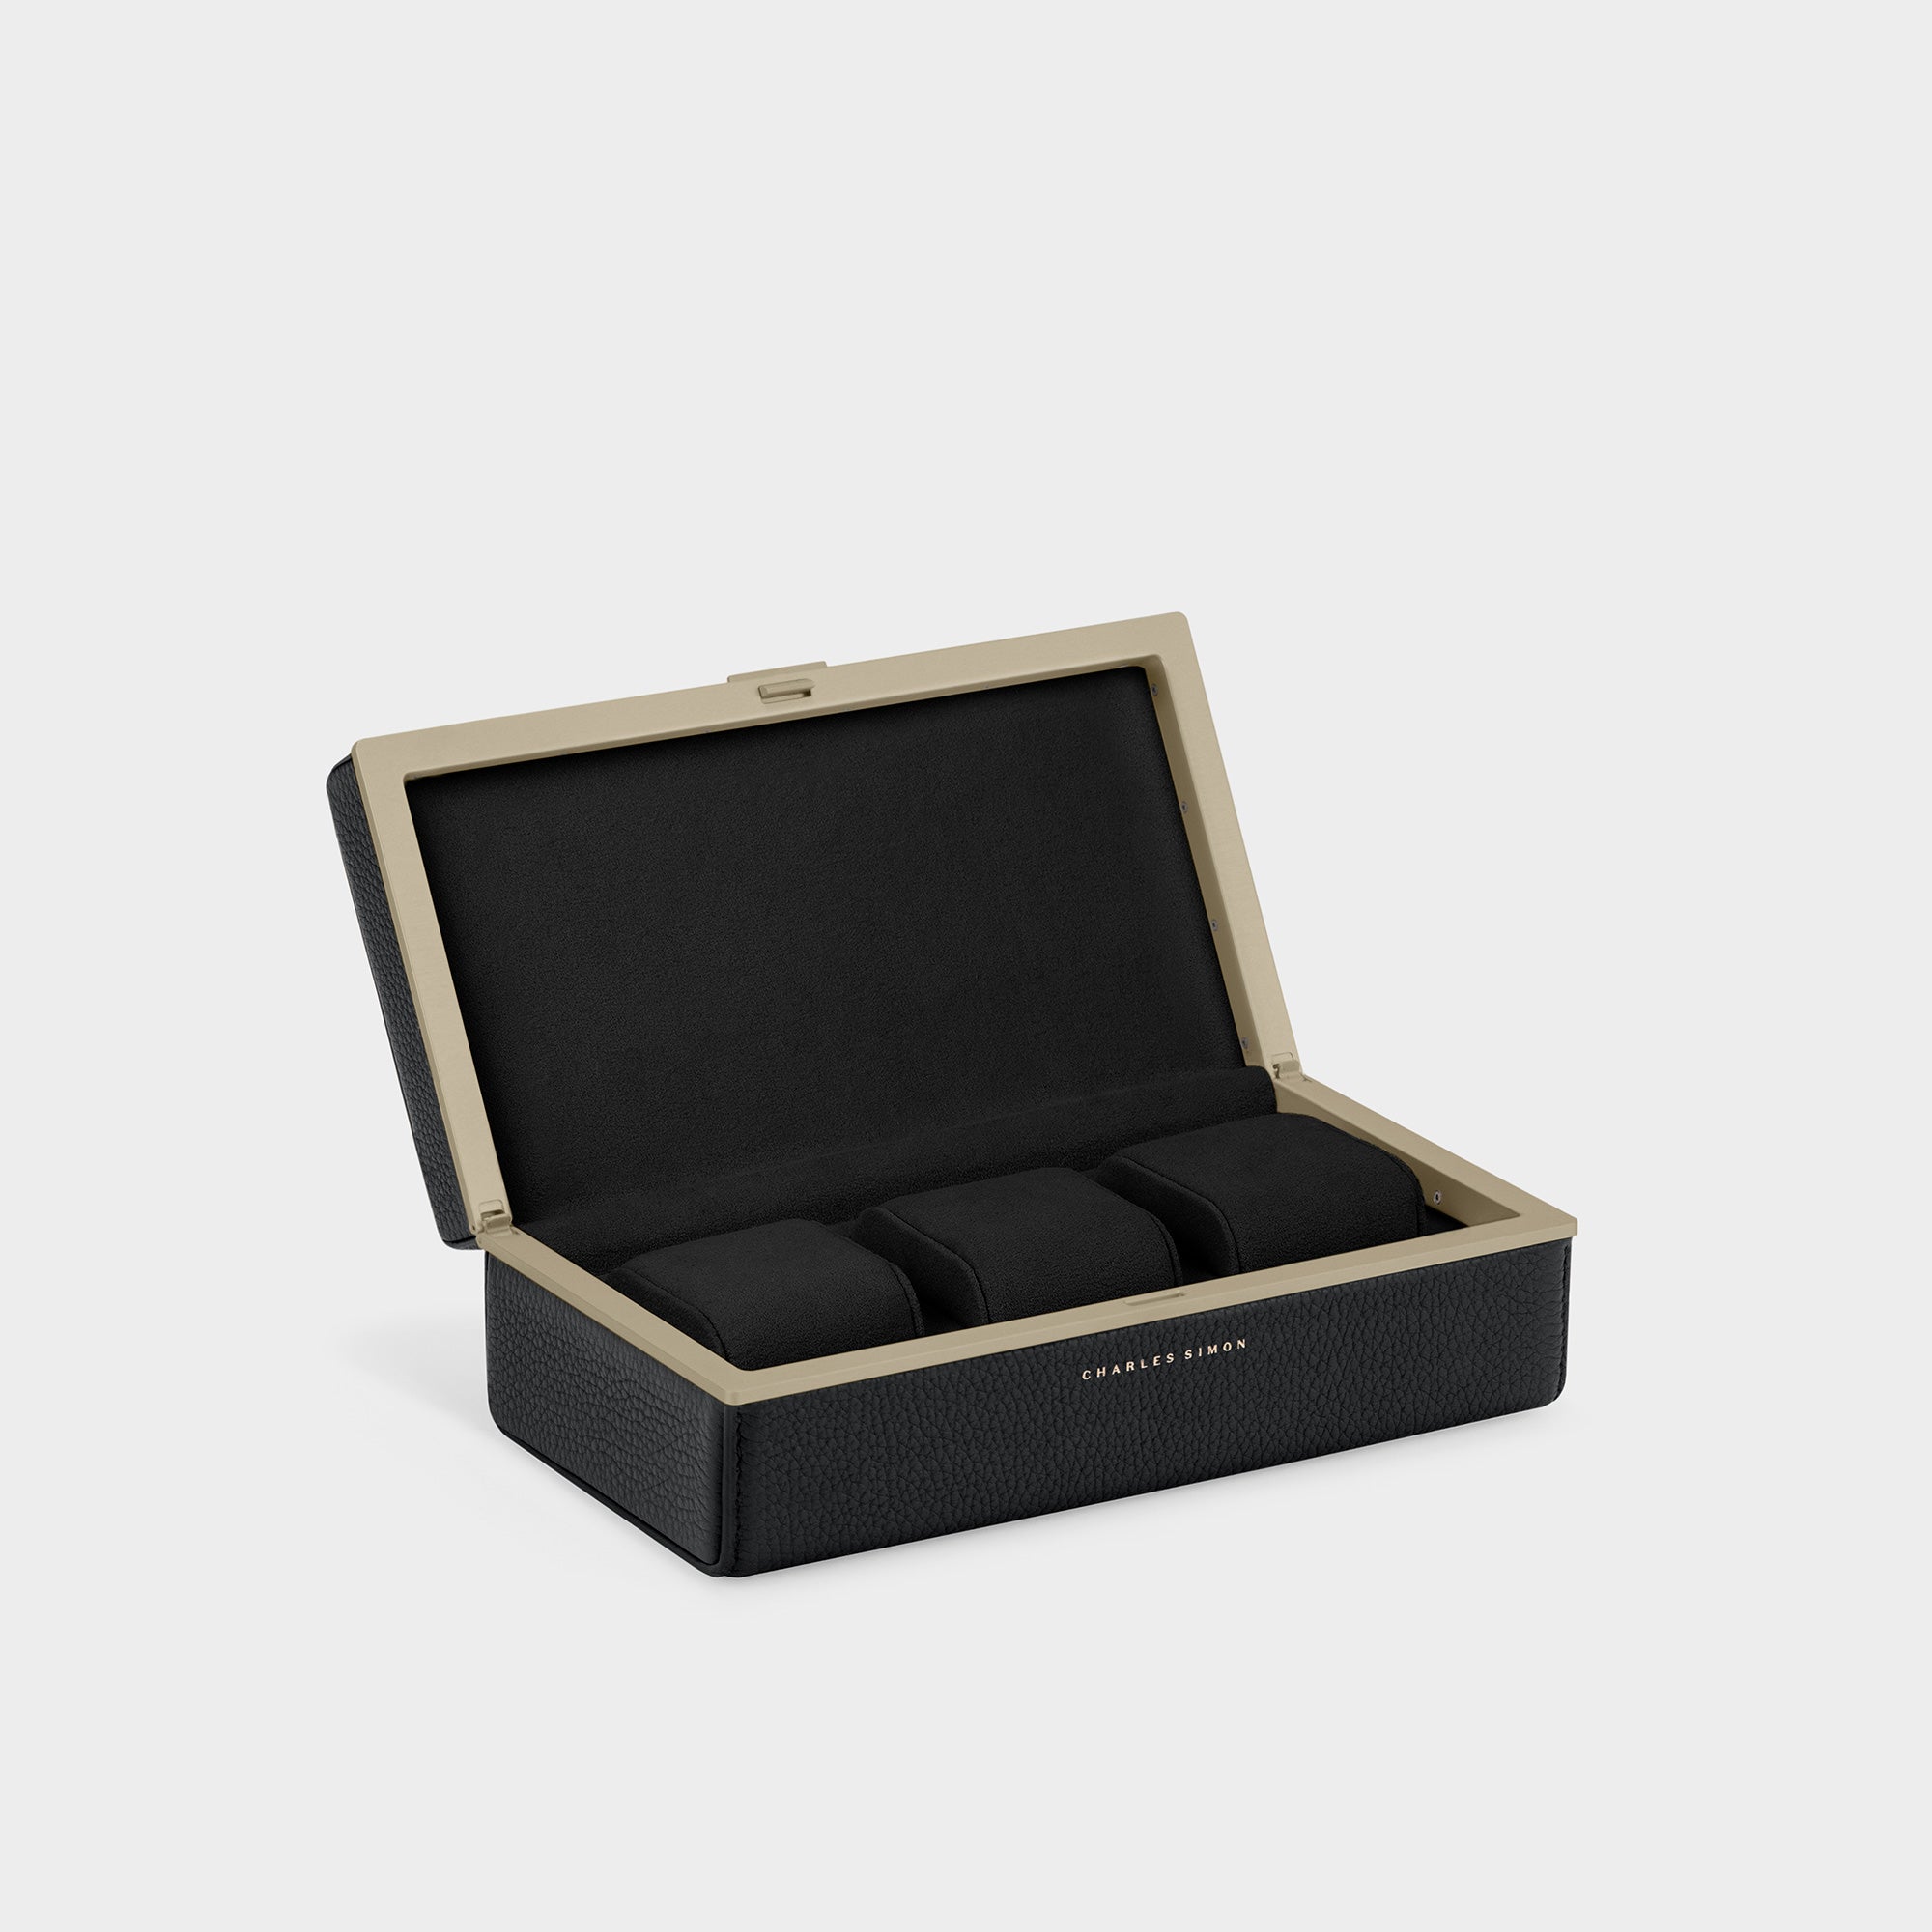 Eaton 3 Watch case in gold casing, black leather and black interior for up to 3 watches. 